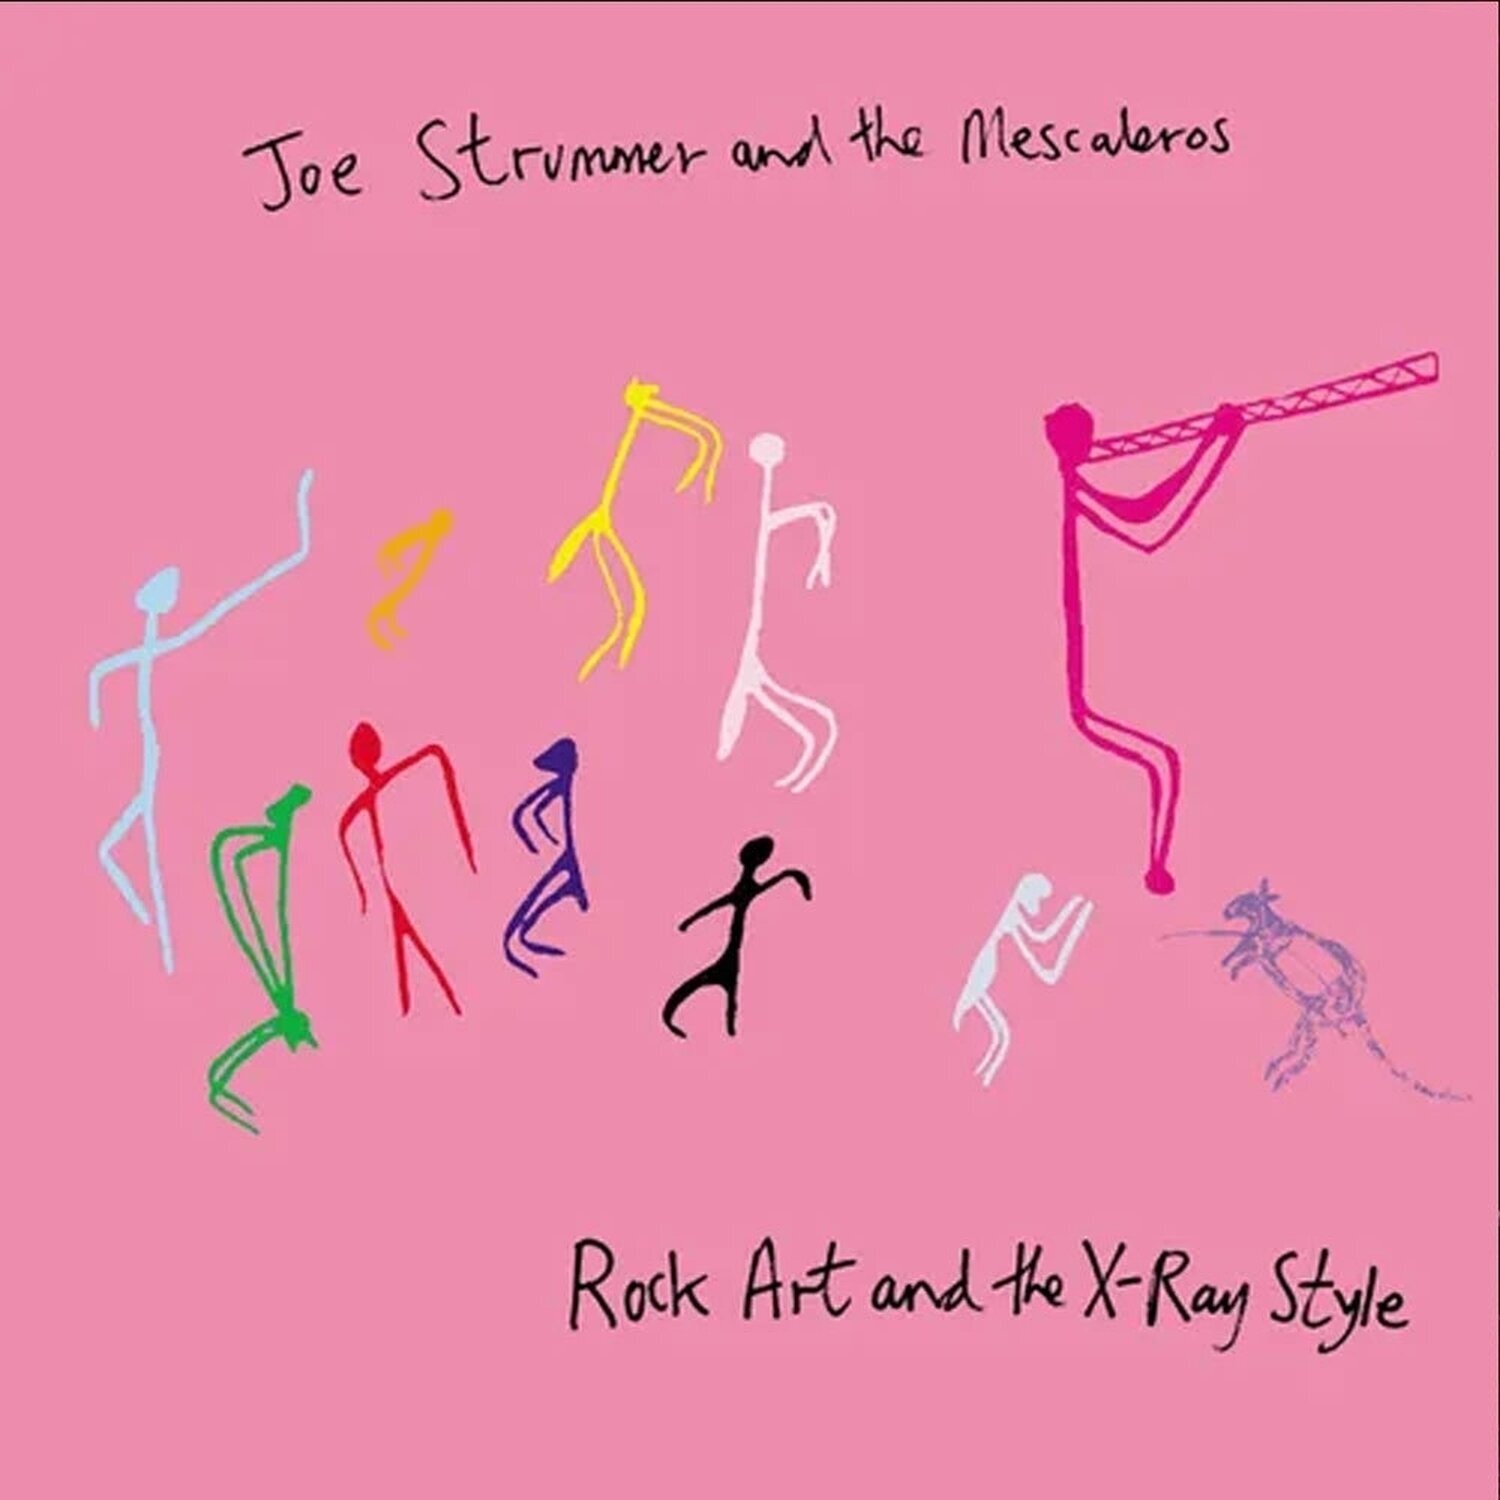 Vinyl Record Joe Strummer & The Mescaleros - Rock Art And The X-Ray Style (Pink Coloured) (Rsd 2024) (2 LP)